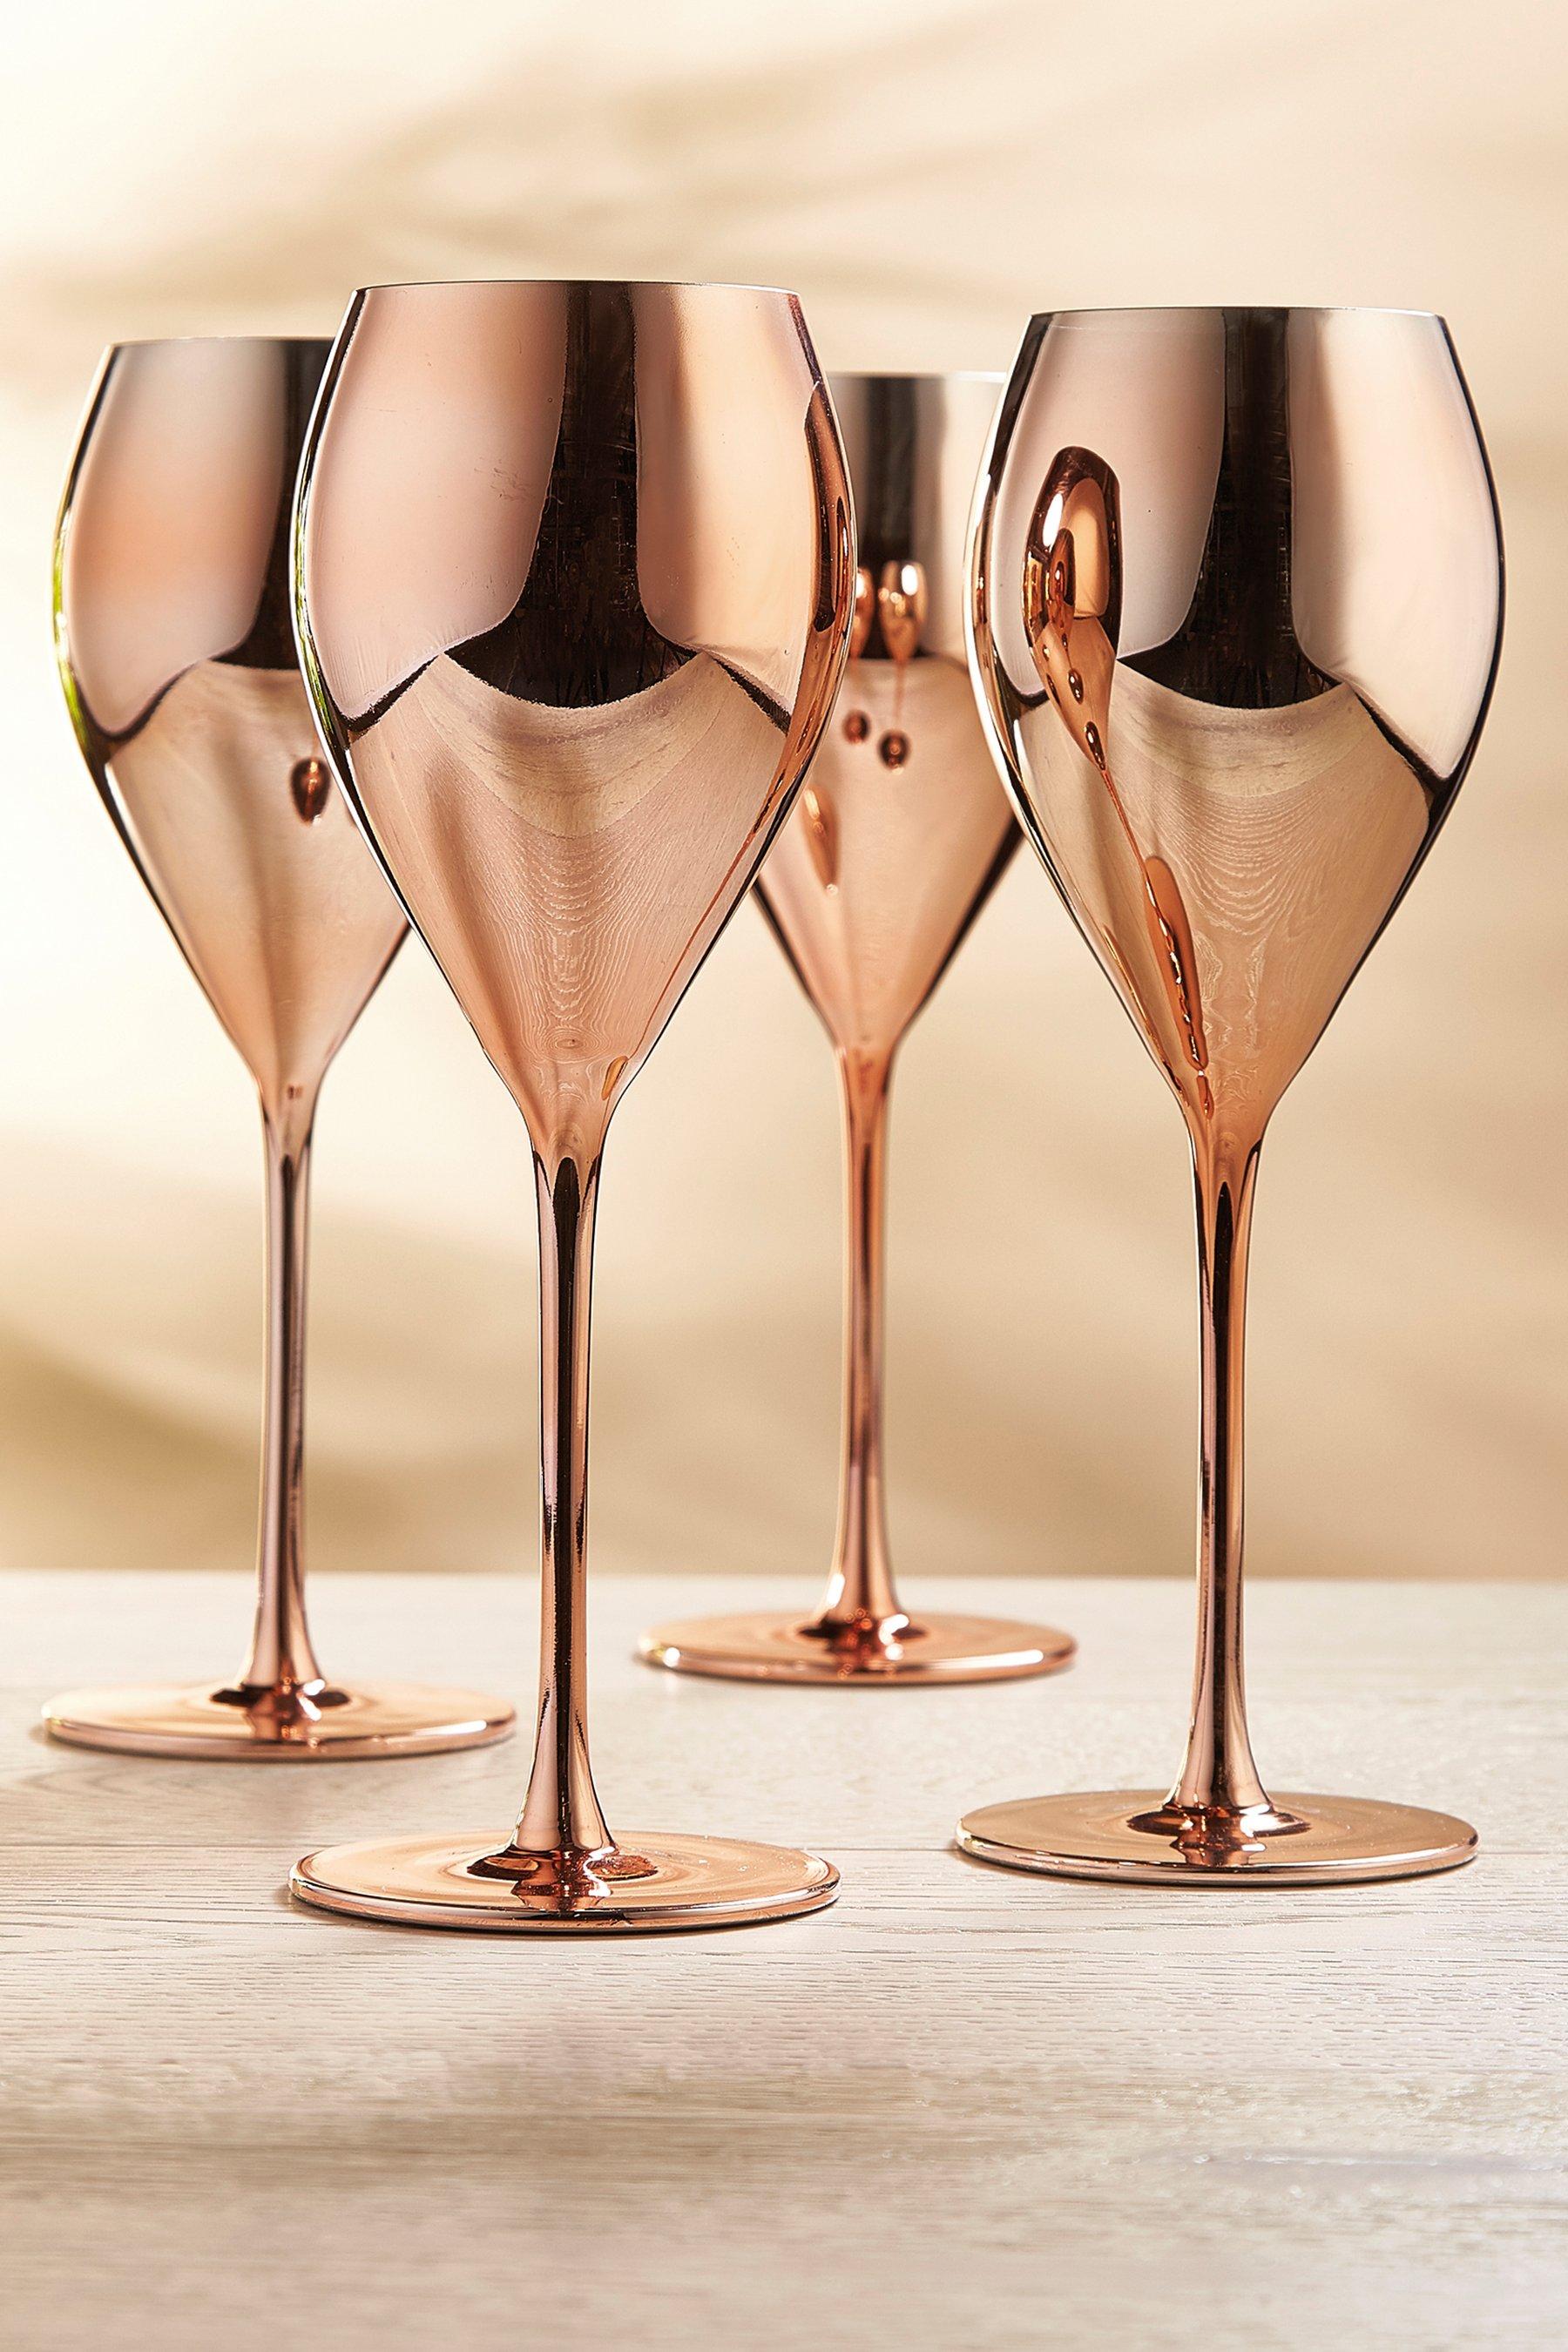 Rose Gold JUSTSPARKLE NEW Deco Glamour Ombre Wine Glasses 4pk 